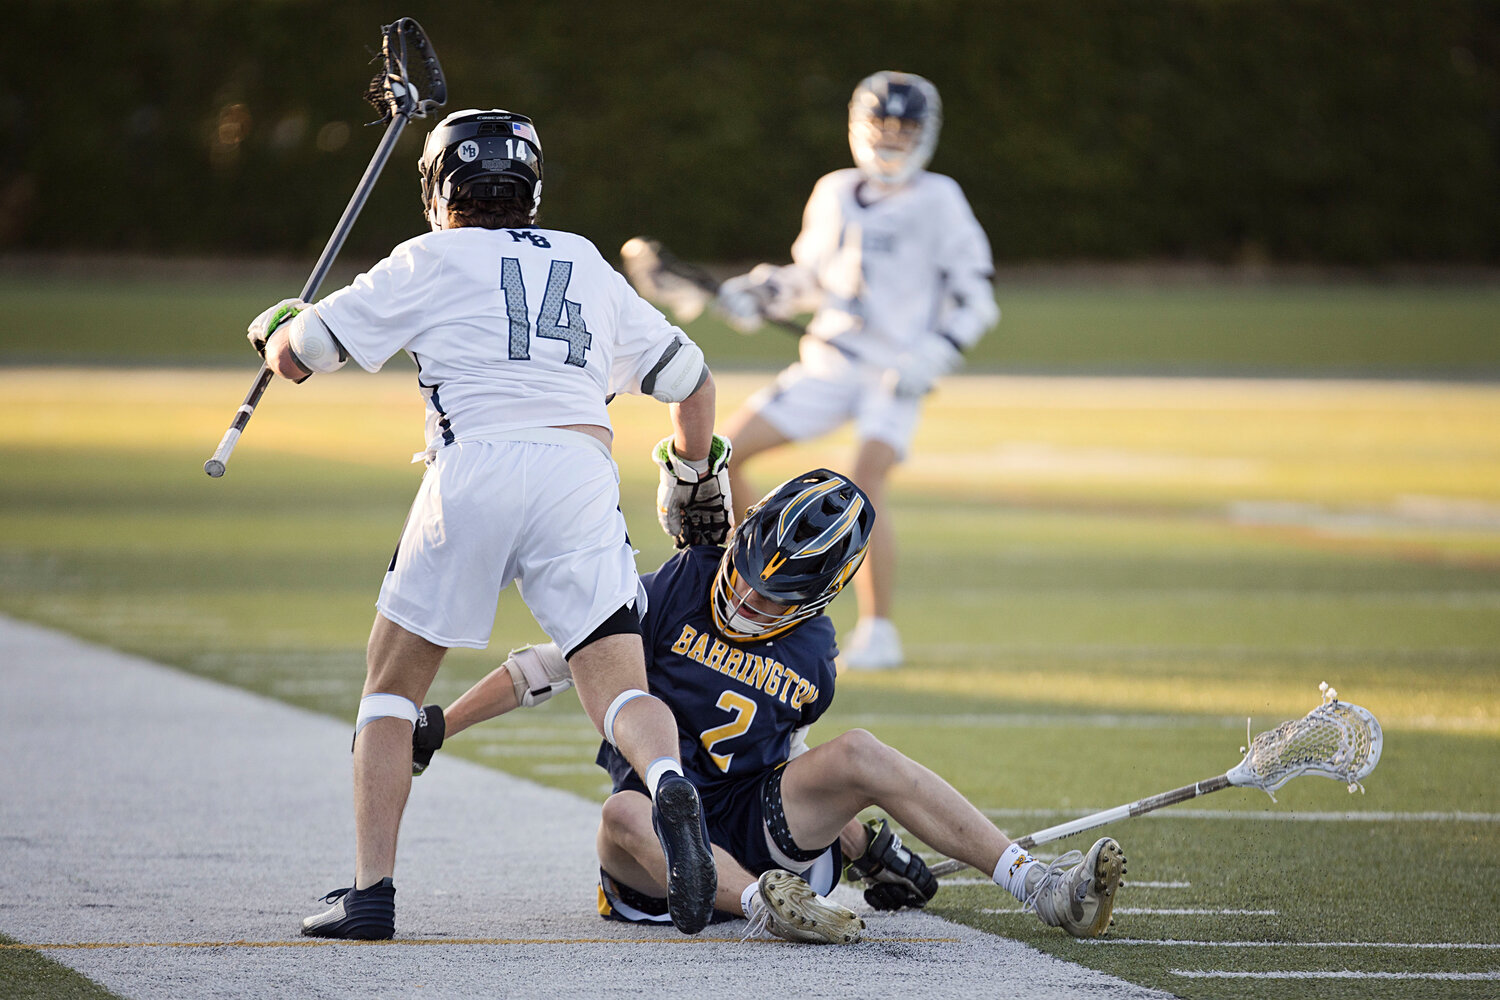 Ben Parylak collides with a Moses Brown opponent while attempting to take possession of the ball.